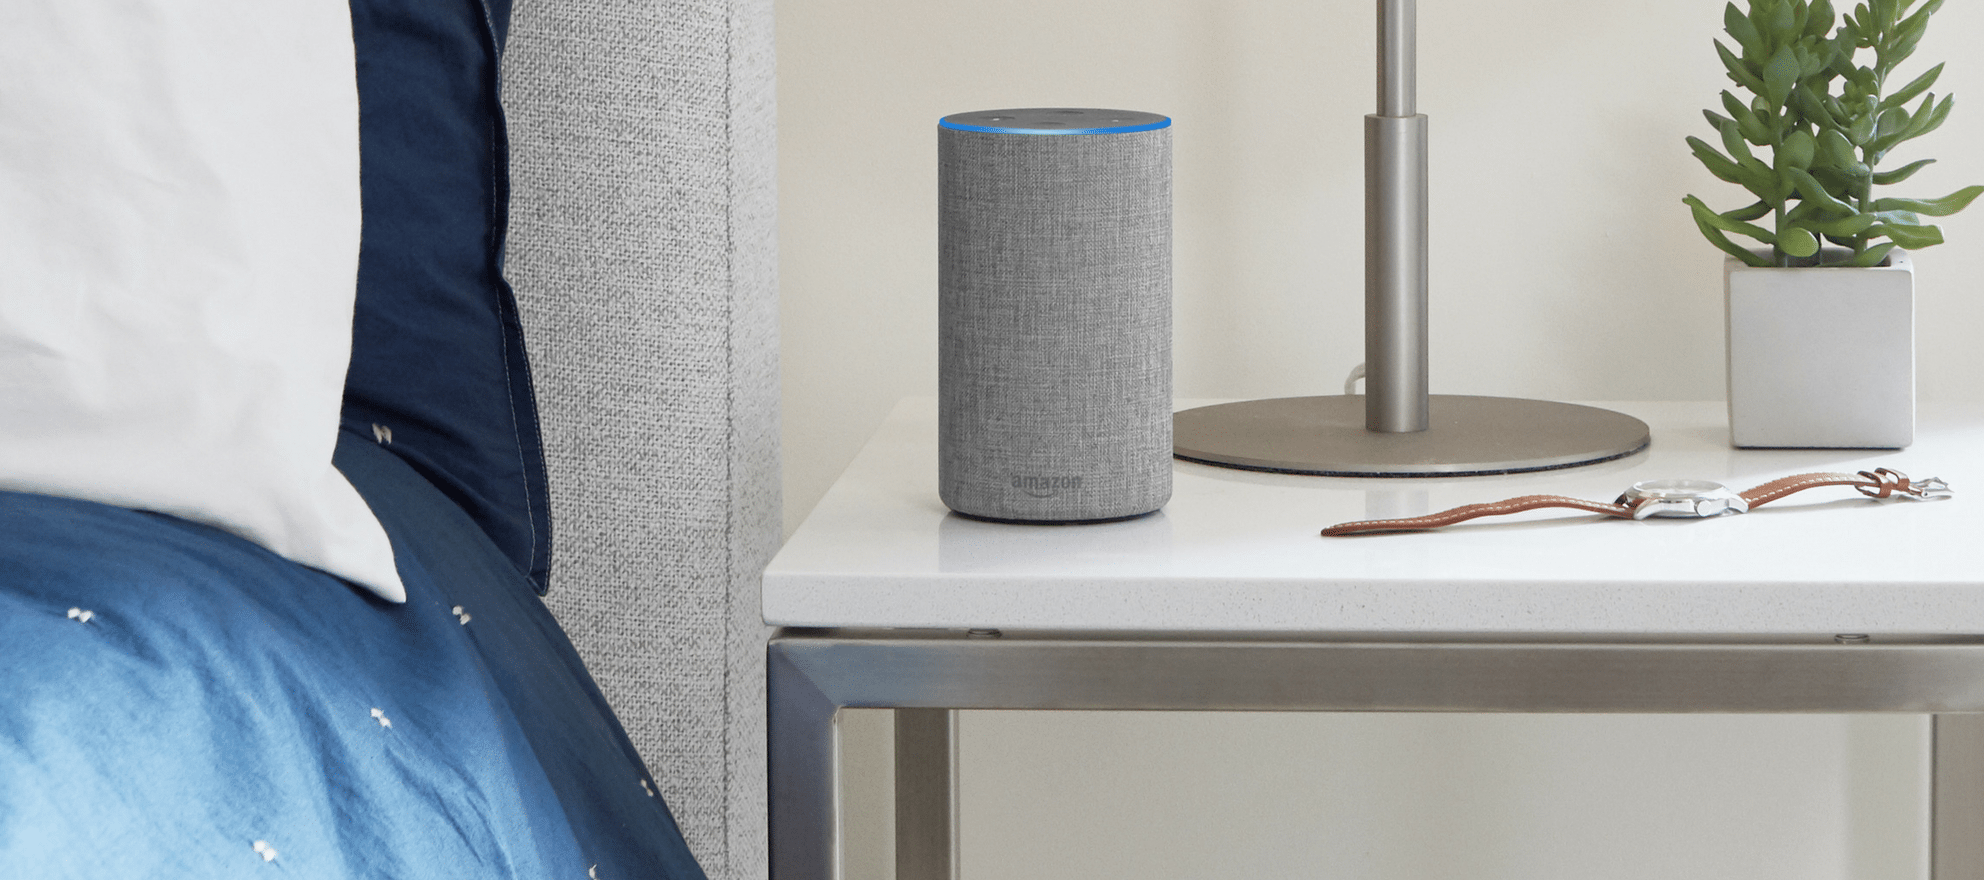 New Alexa skill lets your clients 'Talk To The House'